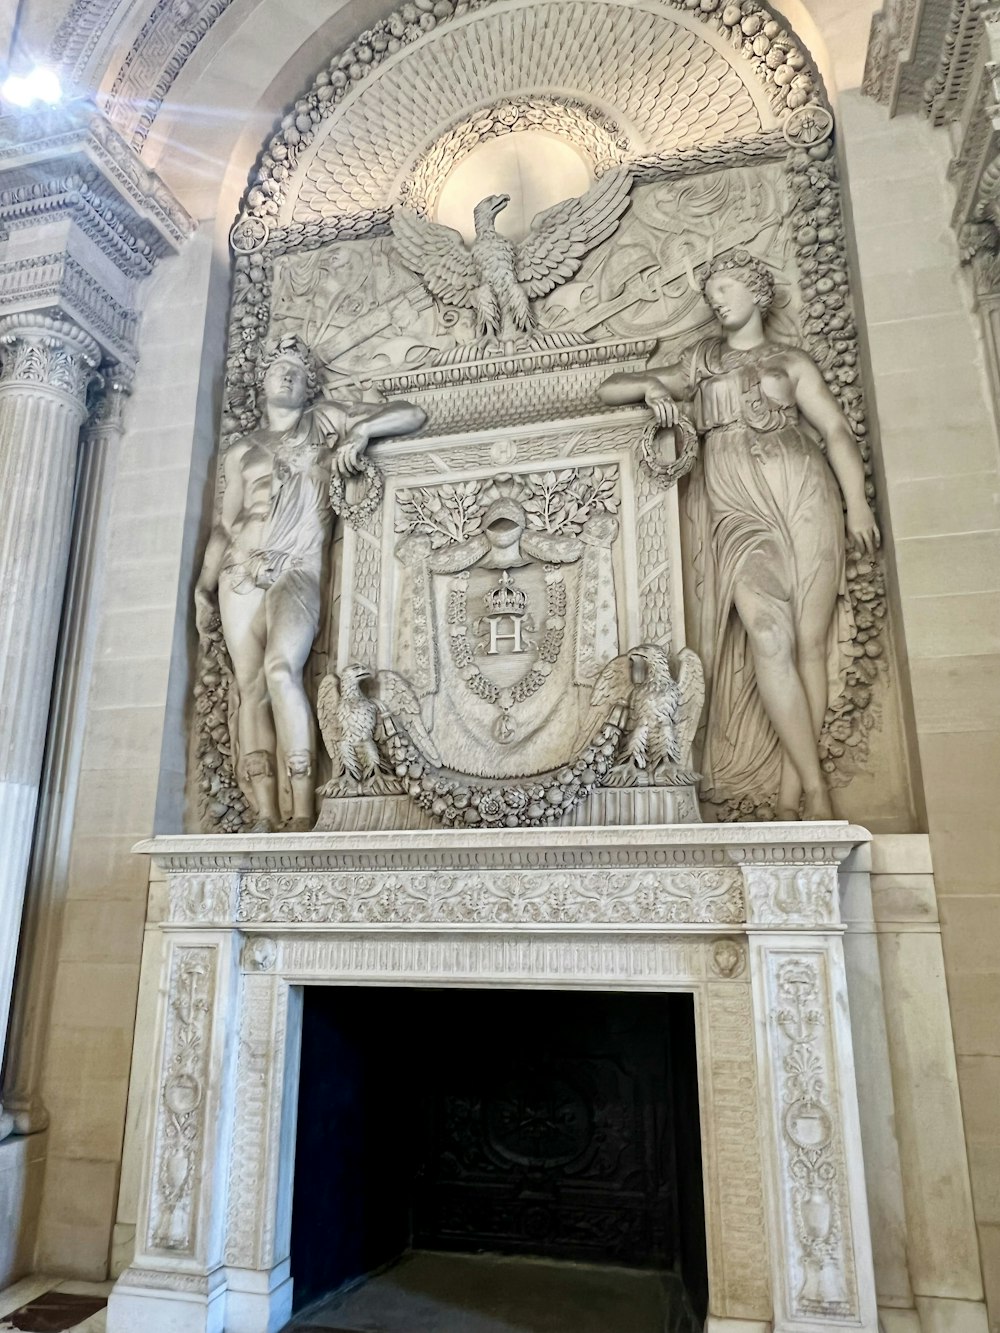 a fireplace in a large room with statues on it